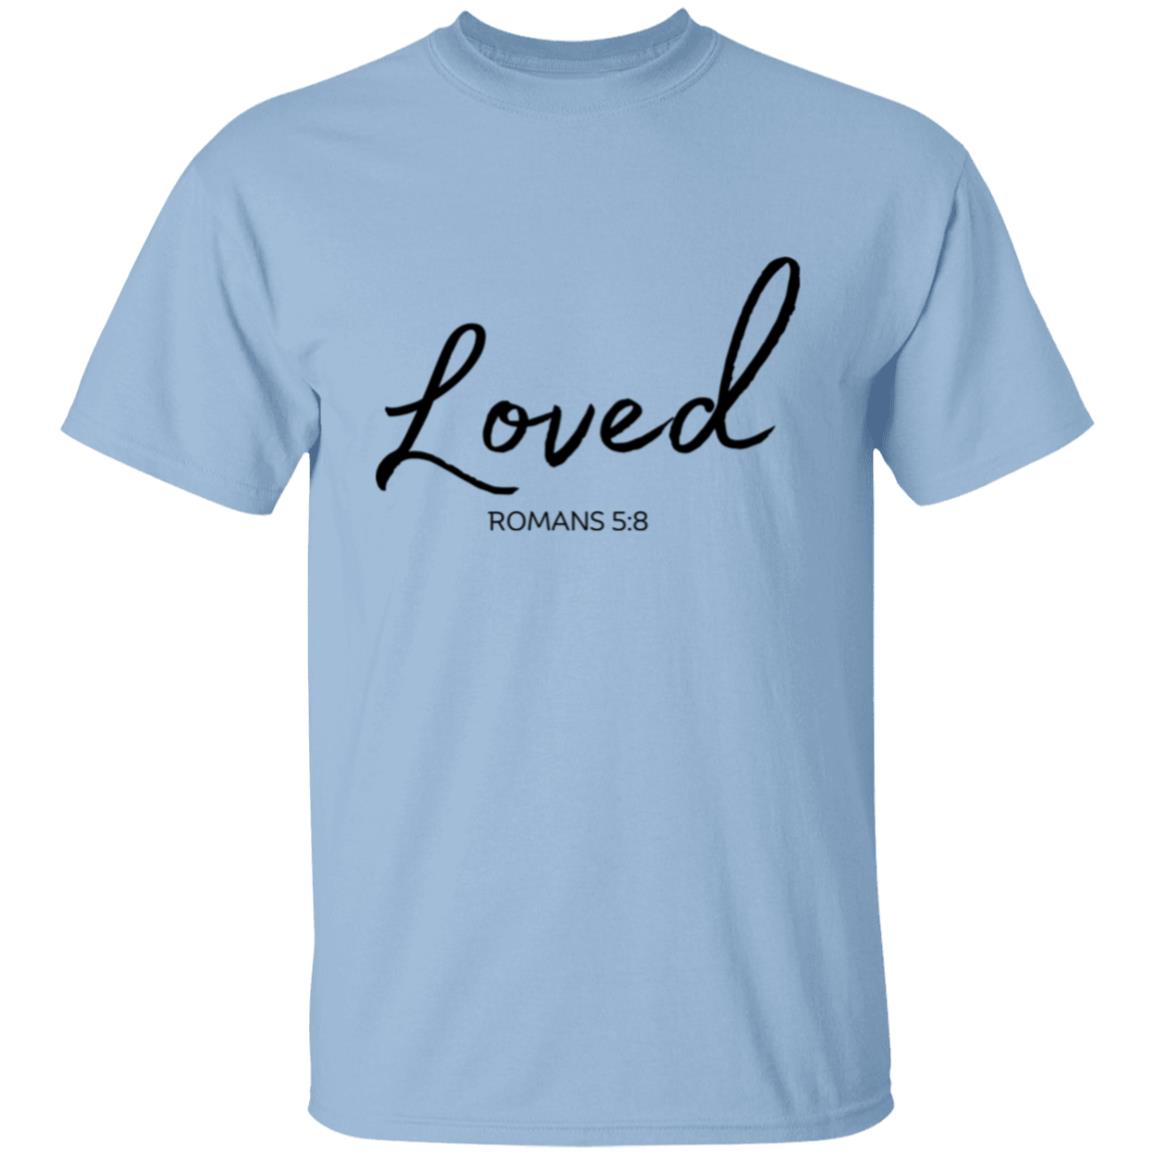 Get trendy with Loved (2) Loved (Romans 5:8) T-Shirt Words of faith series (Black Text) - T-Shirts available at Good Gift Company. Grab yours for $21.95 today!